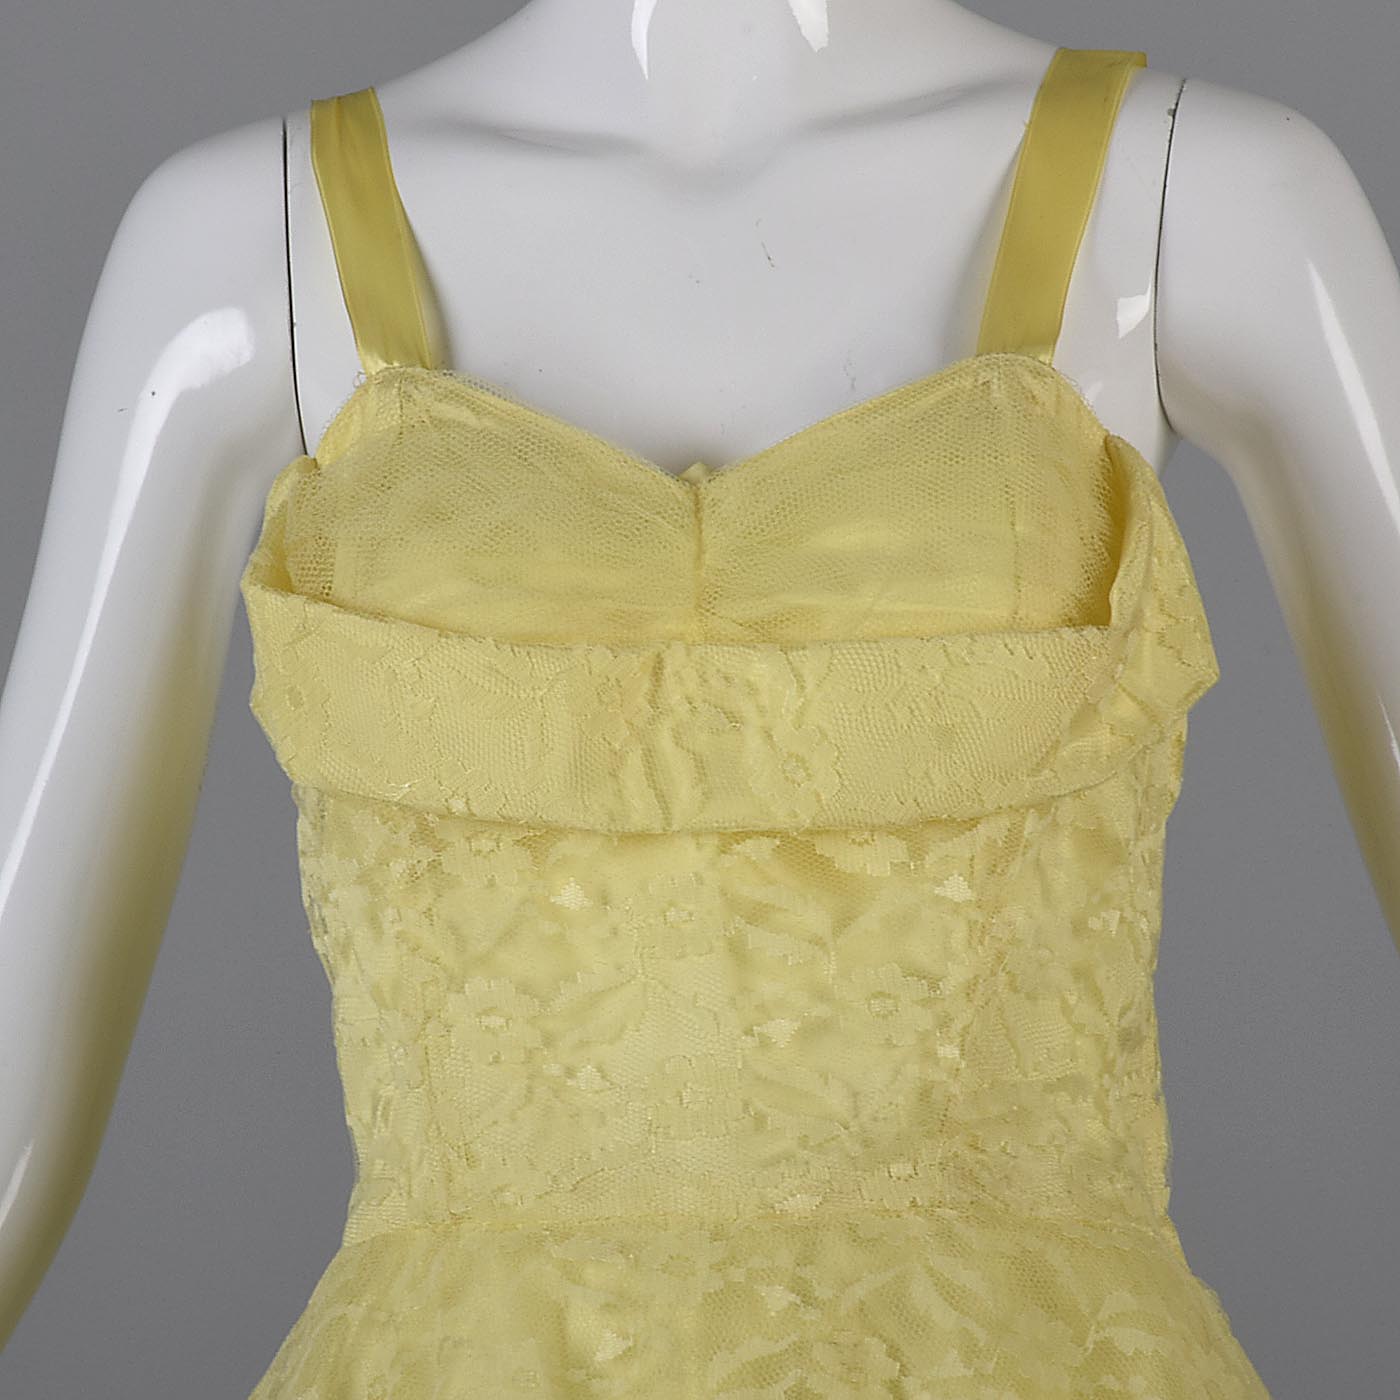 1950s Yellow Lace and Tulle Party Dress